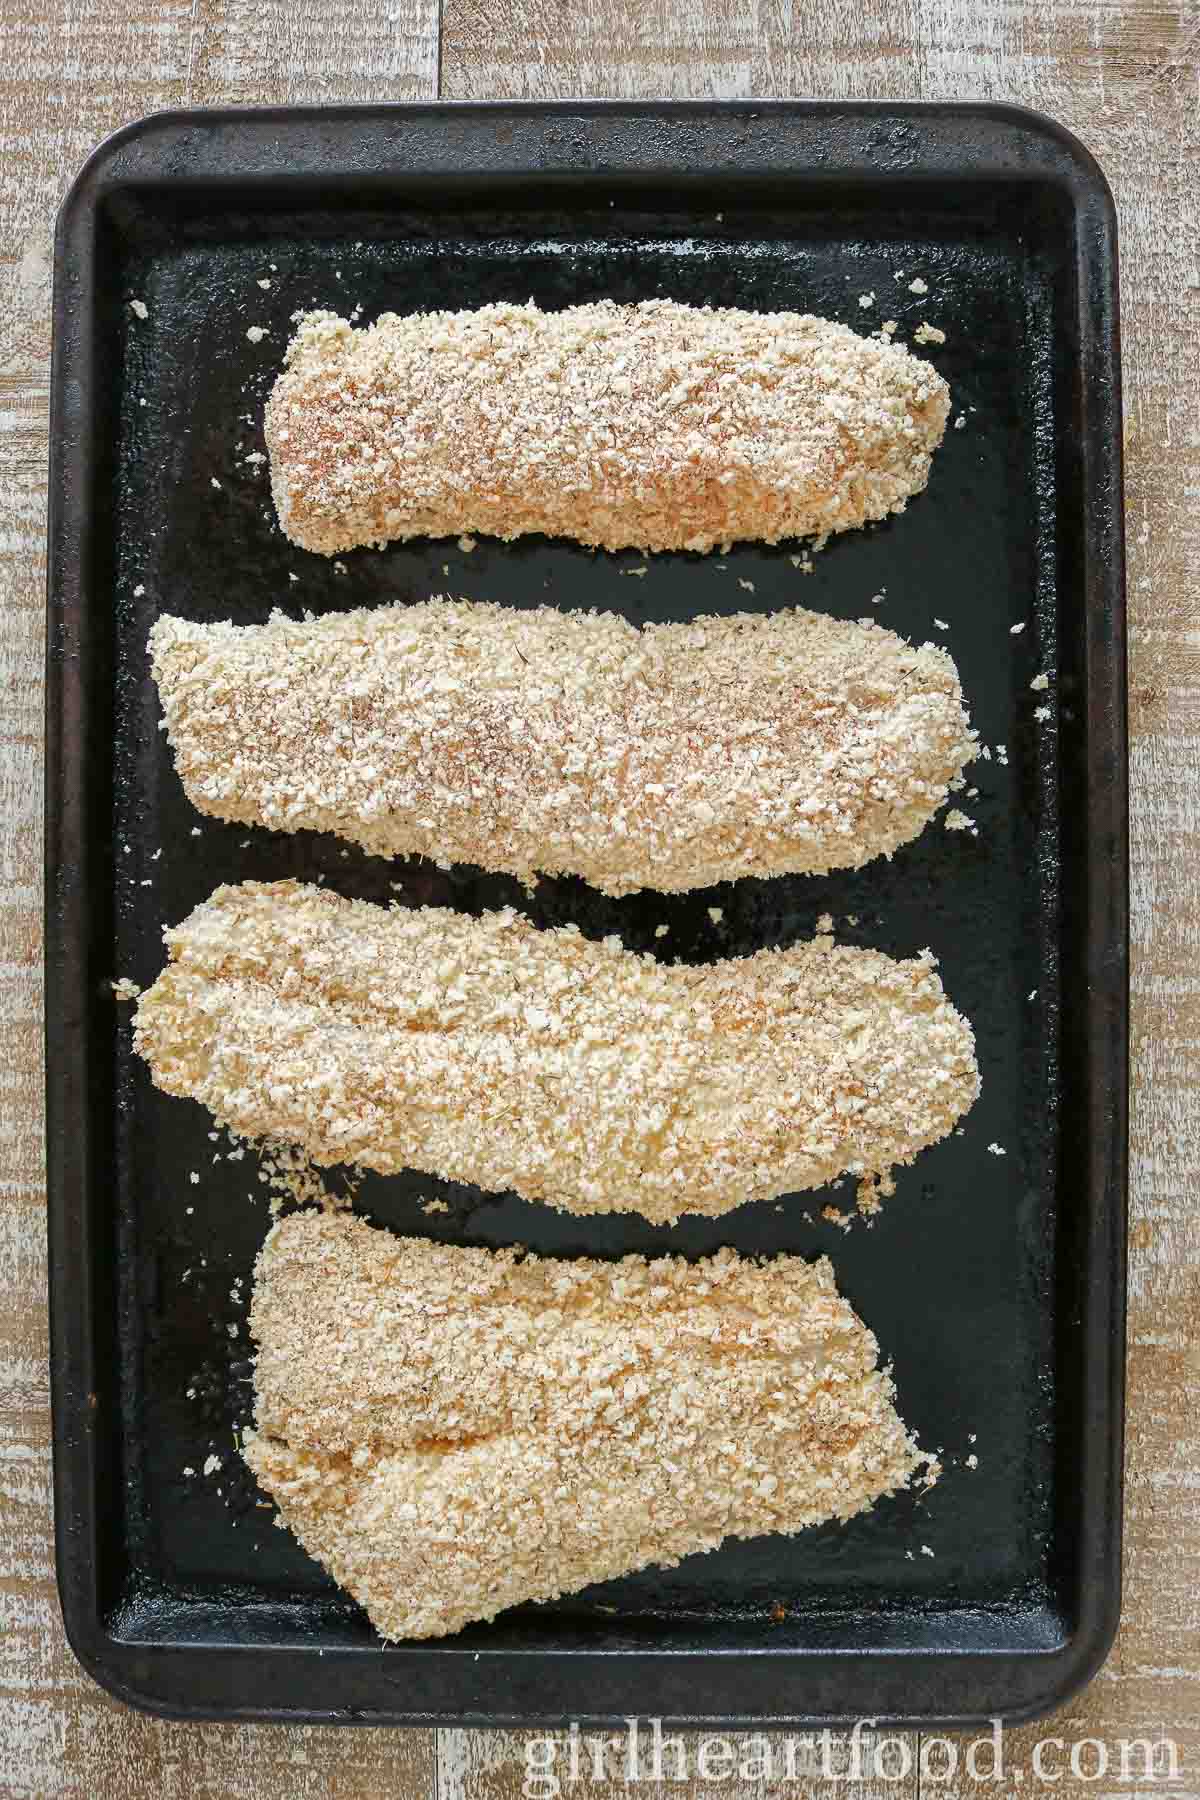 Four panko-coated cod fillets on a sheet pan before baking.